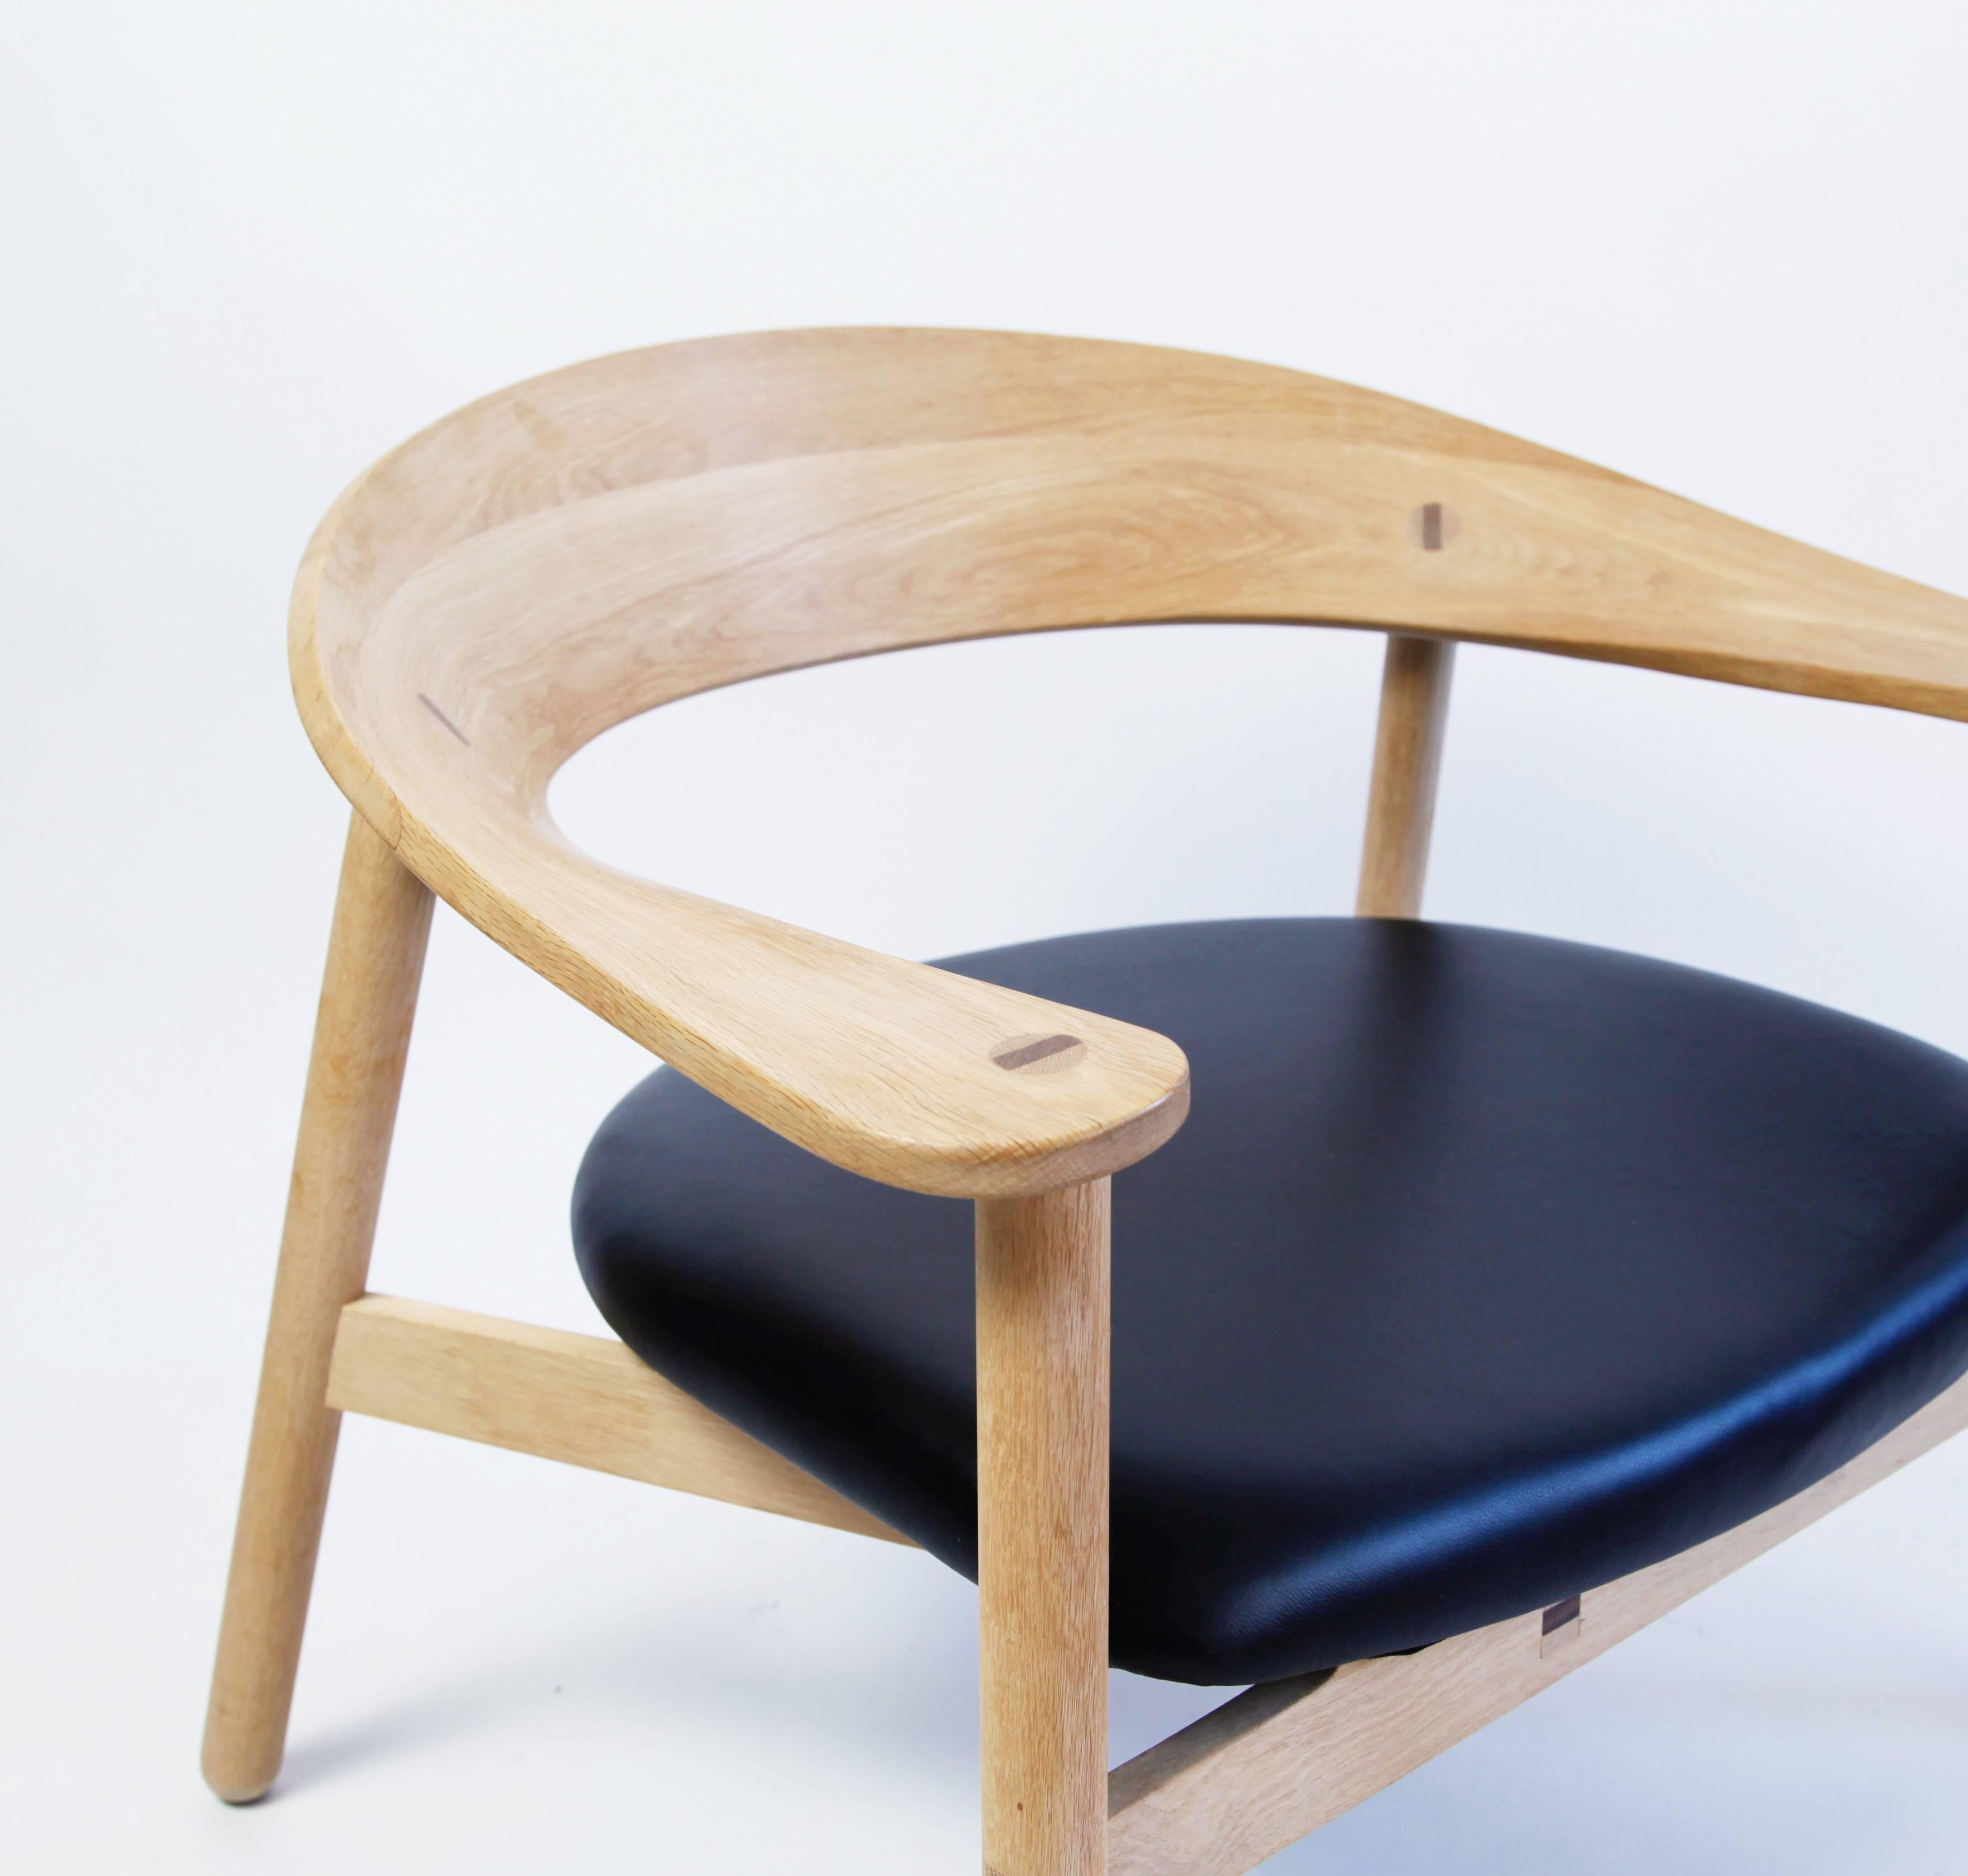 Designed in 2002 by the Danish architect Henrik Bonnelycke, a very comfortable chair which seems to stand in the room as functional sculpture. It is made of white oak and black leather with gorgeous exposed joinery. Lightweight and sturdy.